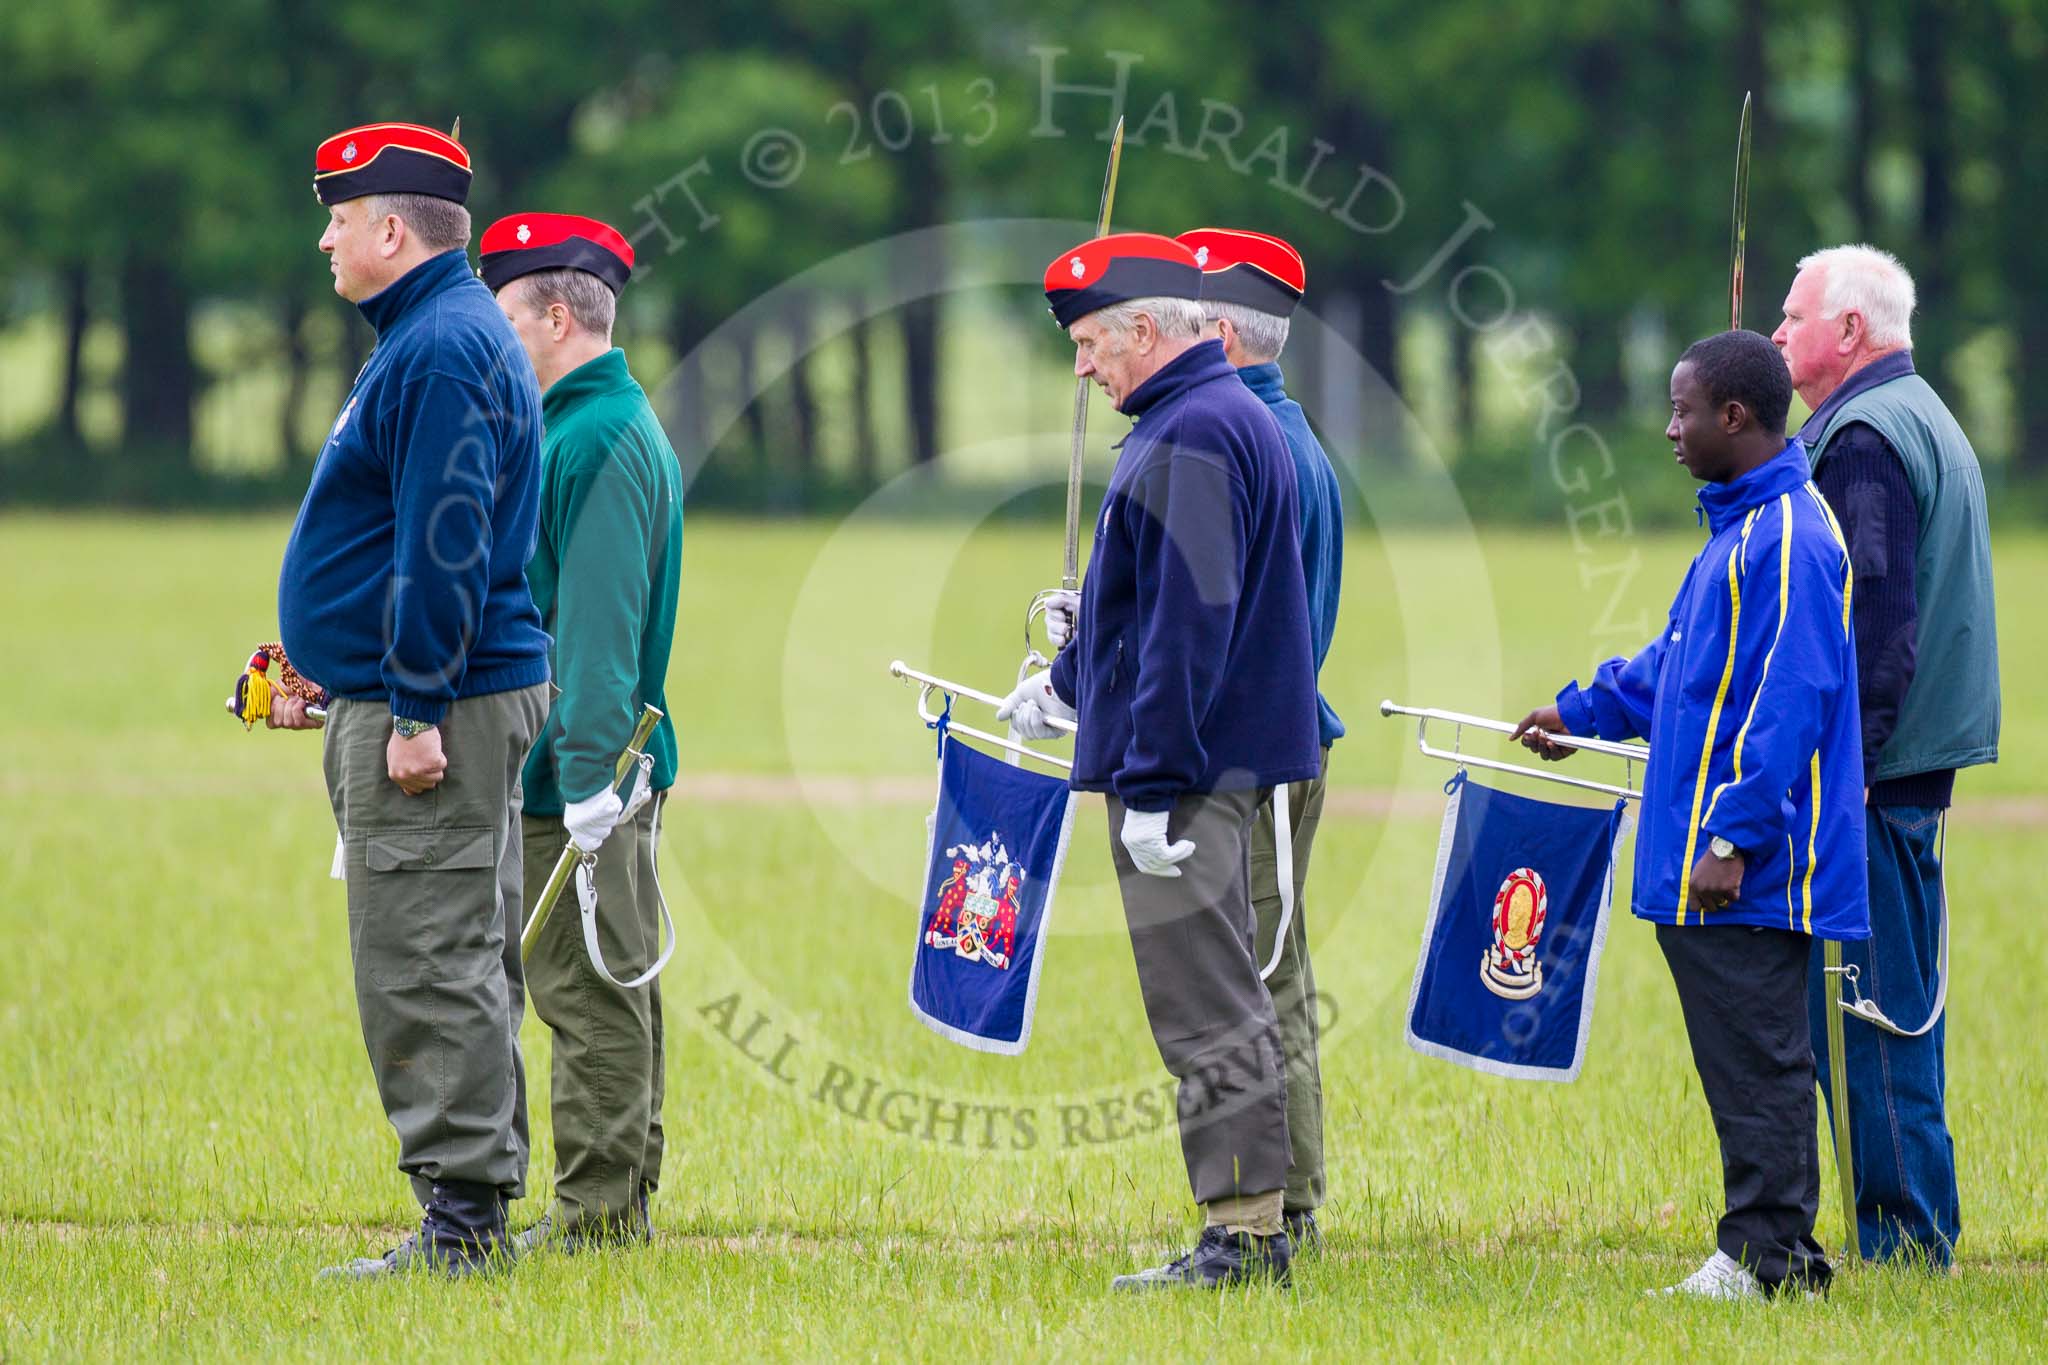 The Light Cavalry HAC Annual Review and Inspection 2013.
Windsor Great Park Review Ground,
Windsor,
Berkshire,
United Kingdom,
on 09 June 2013 at 10:49, image #90